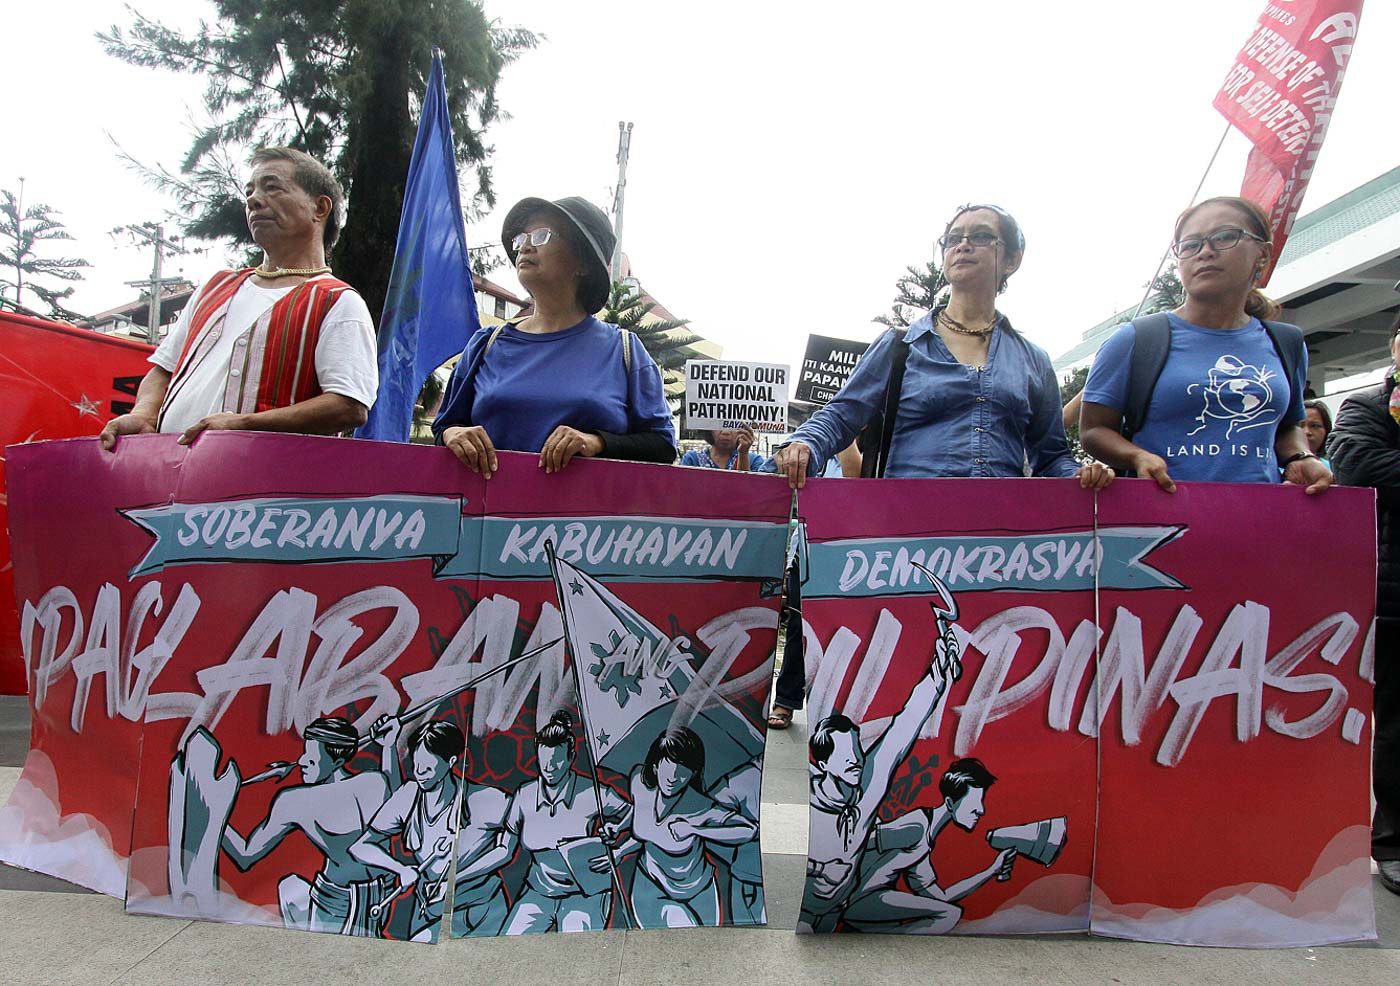 IN PHOTOS: From Luzon to Mindanao, thousands cry ‘Atin ang ‘Pinas!’